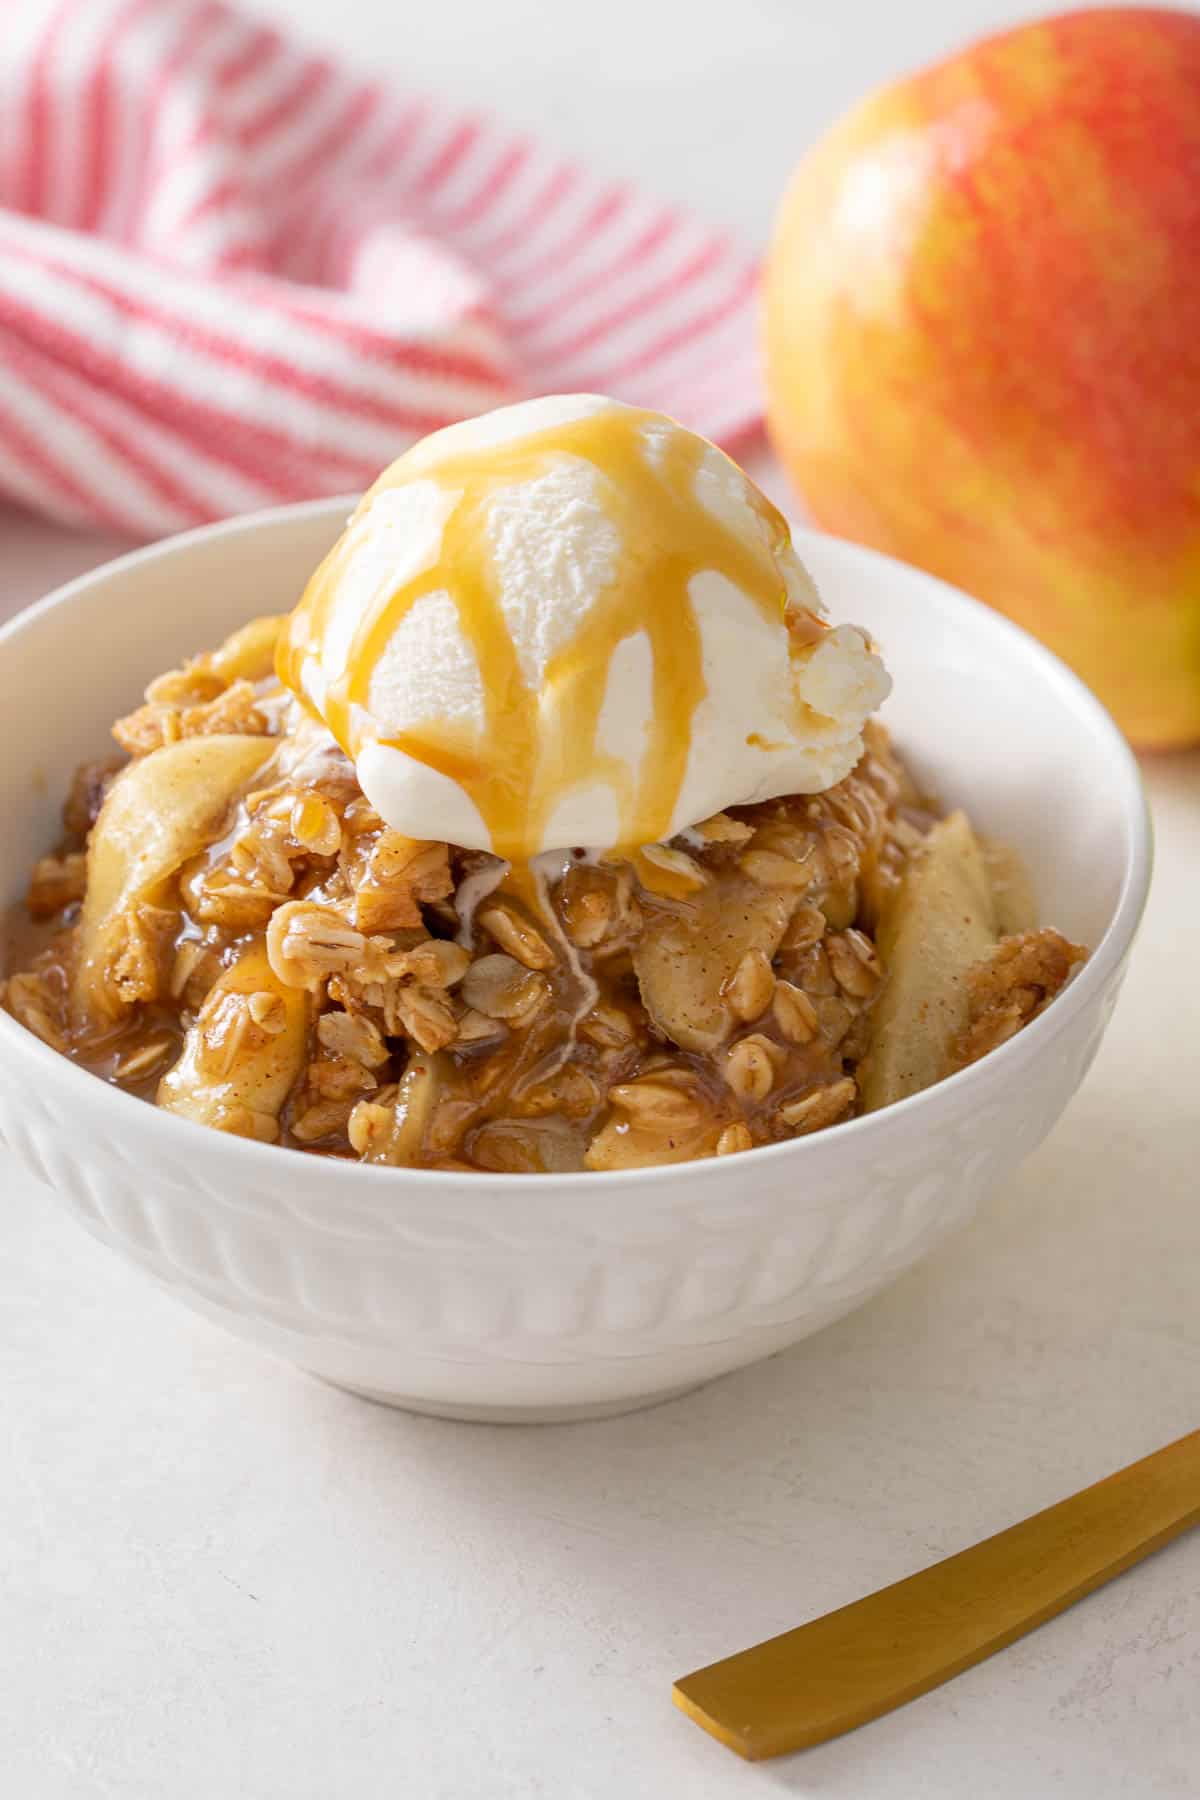 Apple crisp topped with a scoop of ice cream and drizzled with caramel sauce in a white bowl.